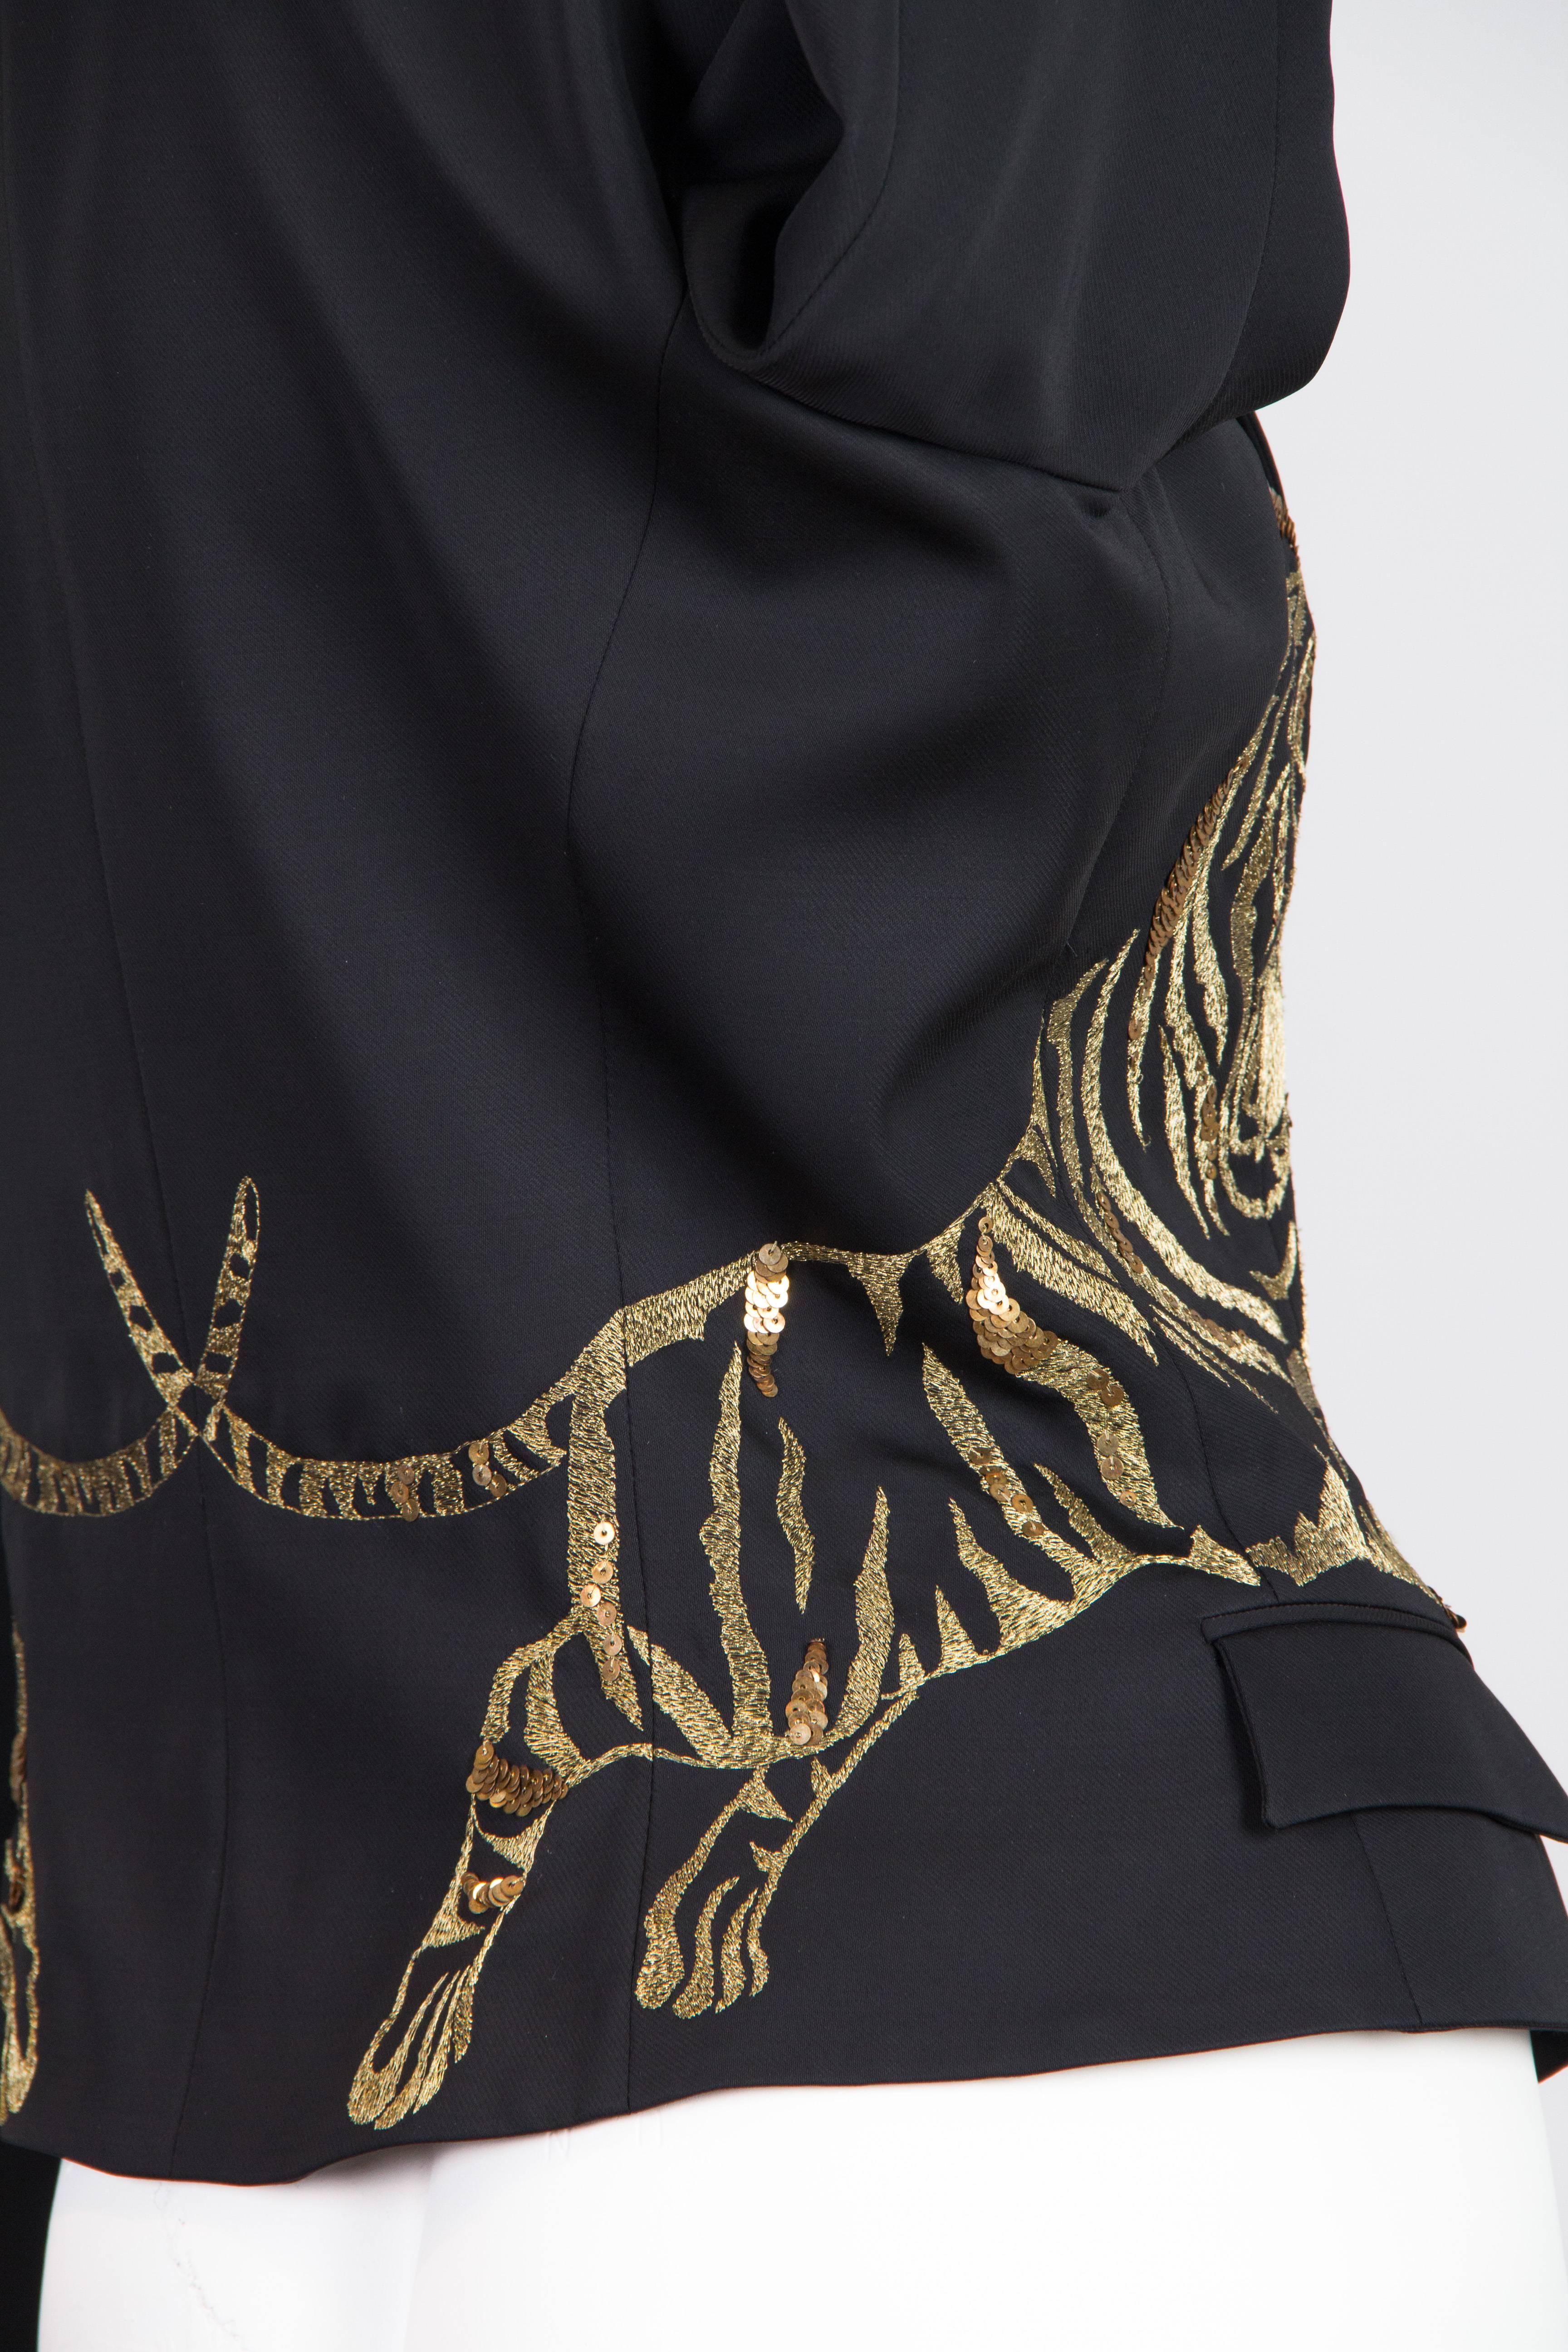 Black Alexander McQueen Jacket with Embroidered Gold Tigers